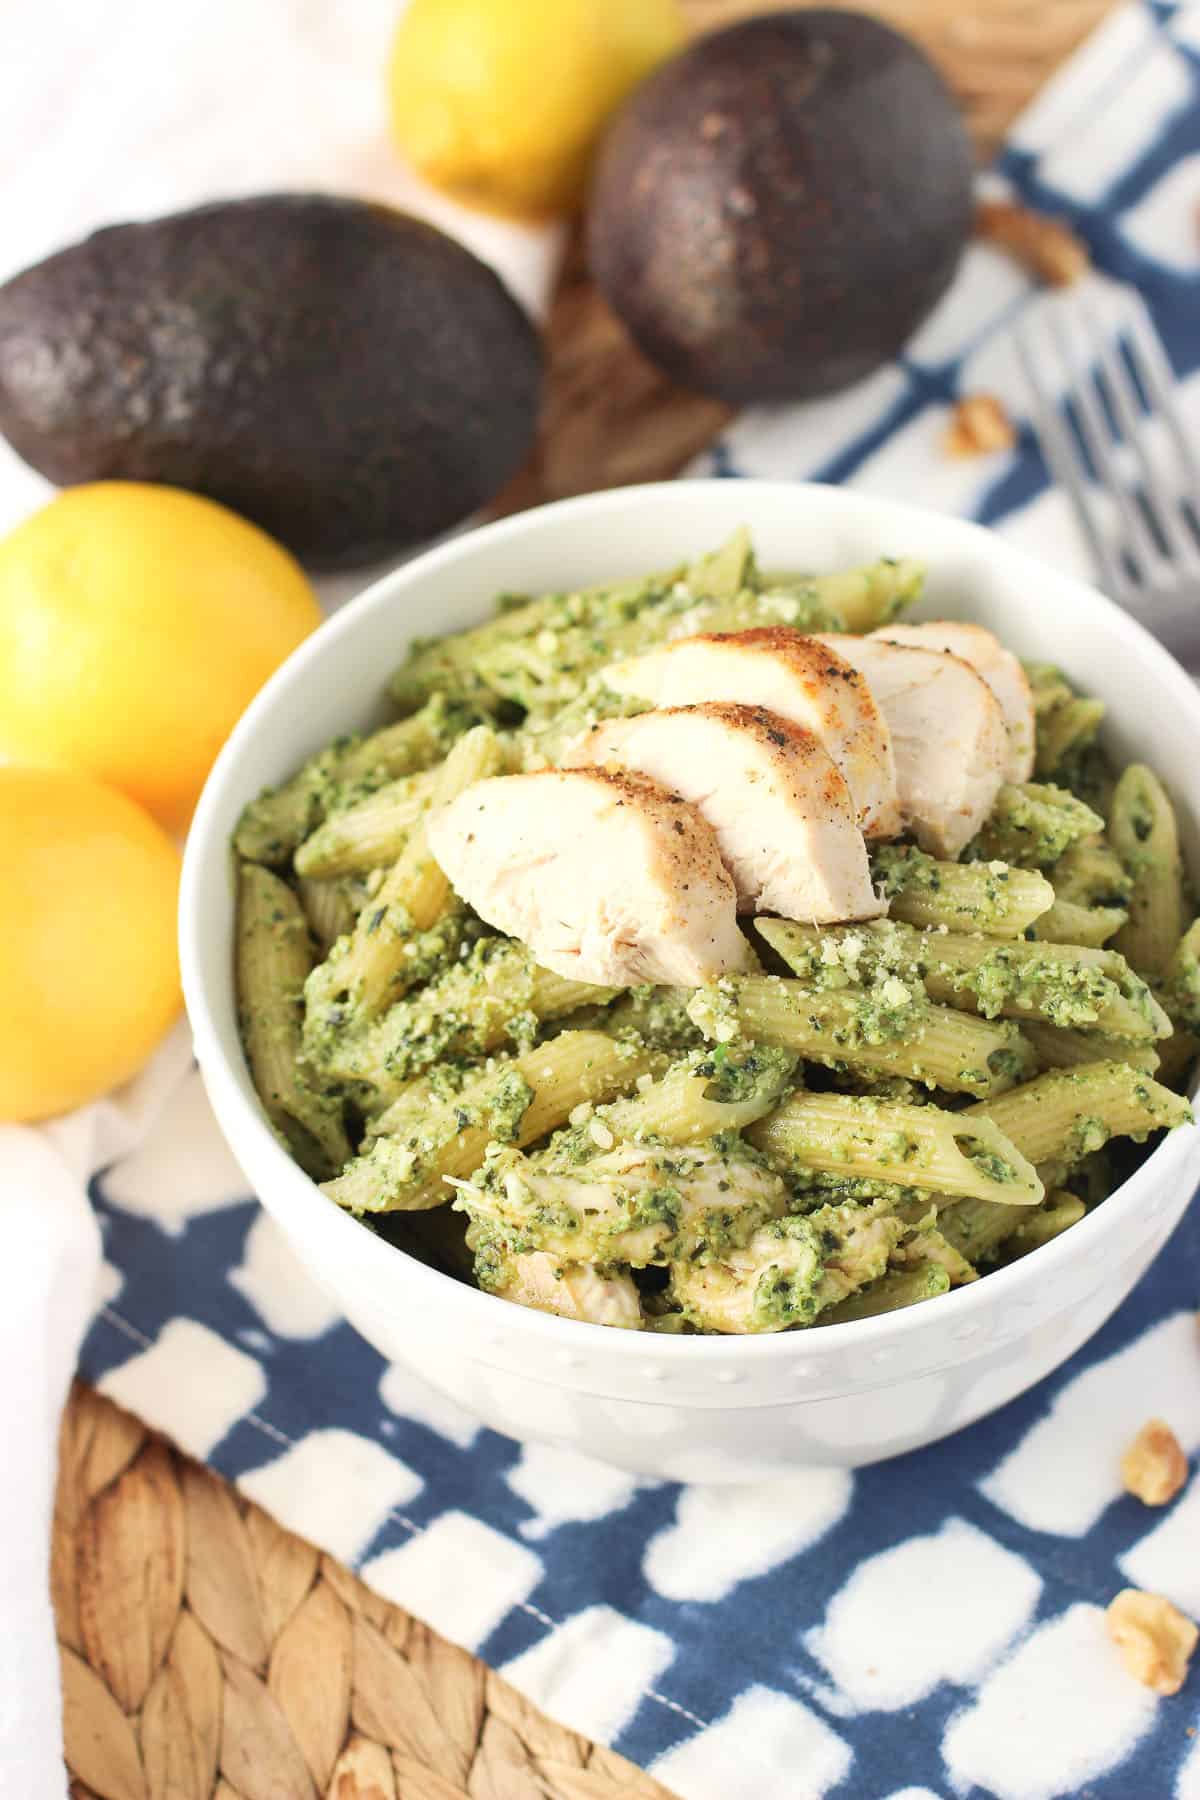 A bowl of pesto-covered penne with grilled chicken surrounded by lemons and avocados.